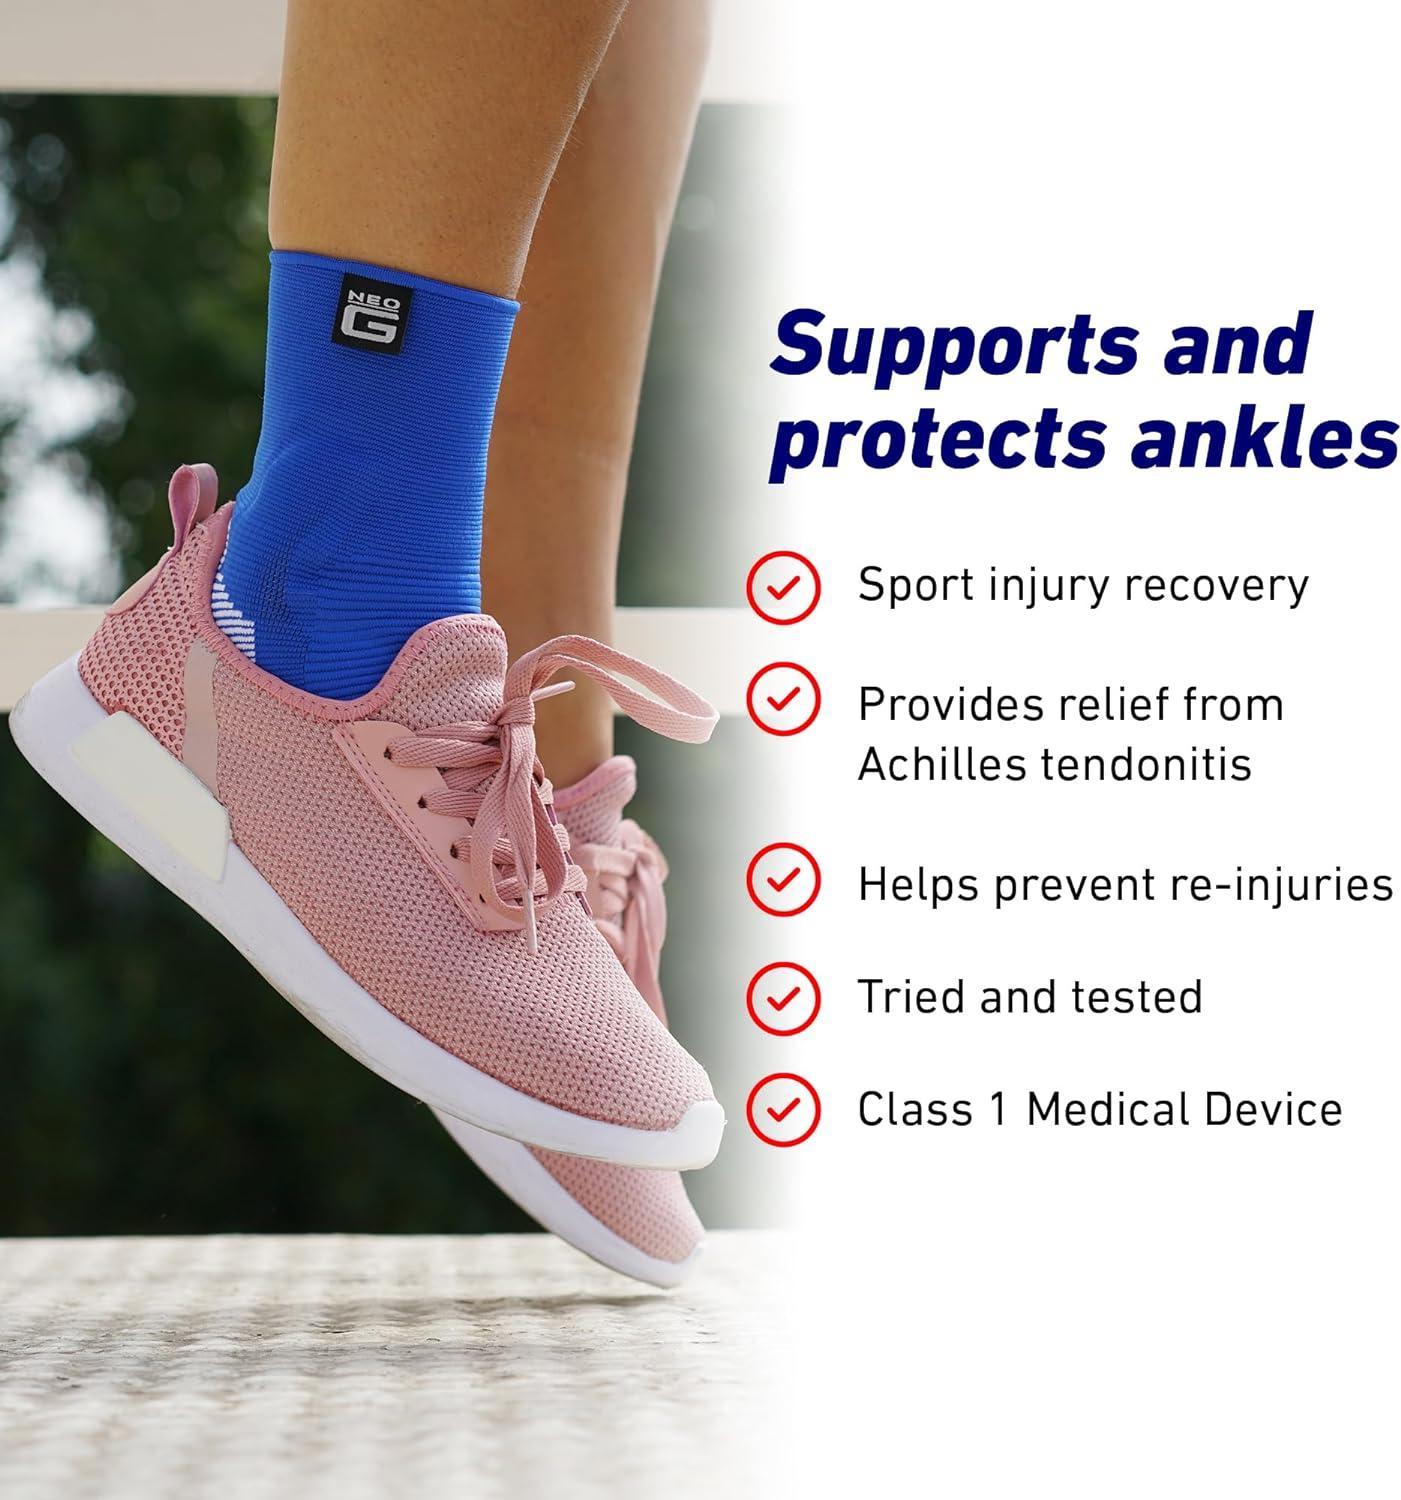 Neo G Ankle Support for Sprained Ankle Achilles Tendonitis Support Injured  or Weak ankles Arthritis - Ankle Brace Foot Support for Ligament Damage.  Multi Zone Compression - Airflow Plus - XL X-LARGE: 27 - 32 CM